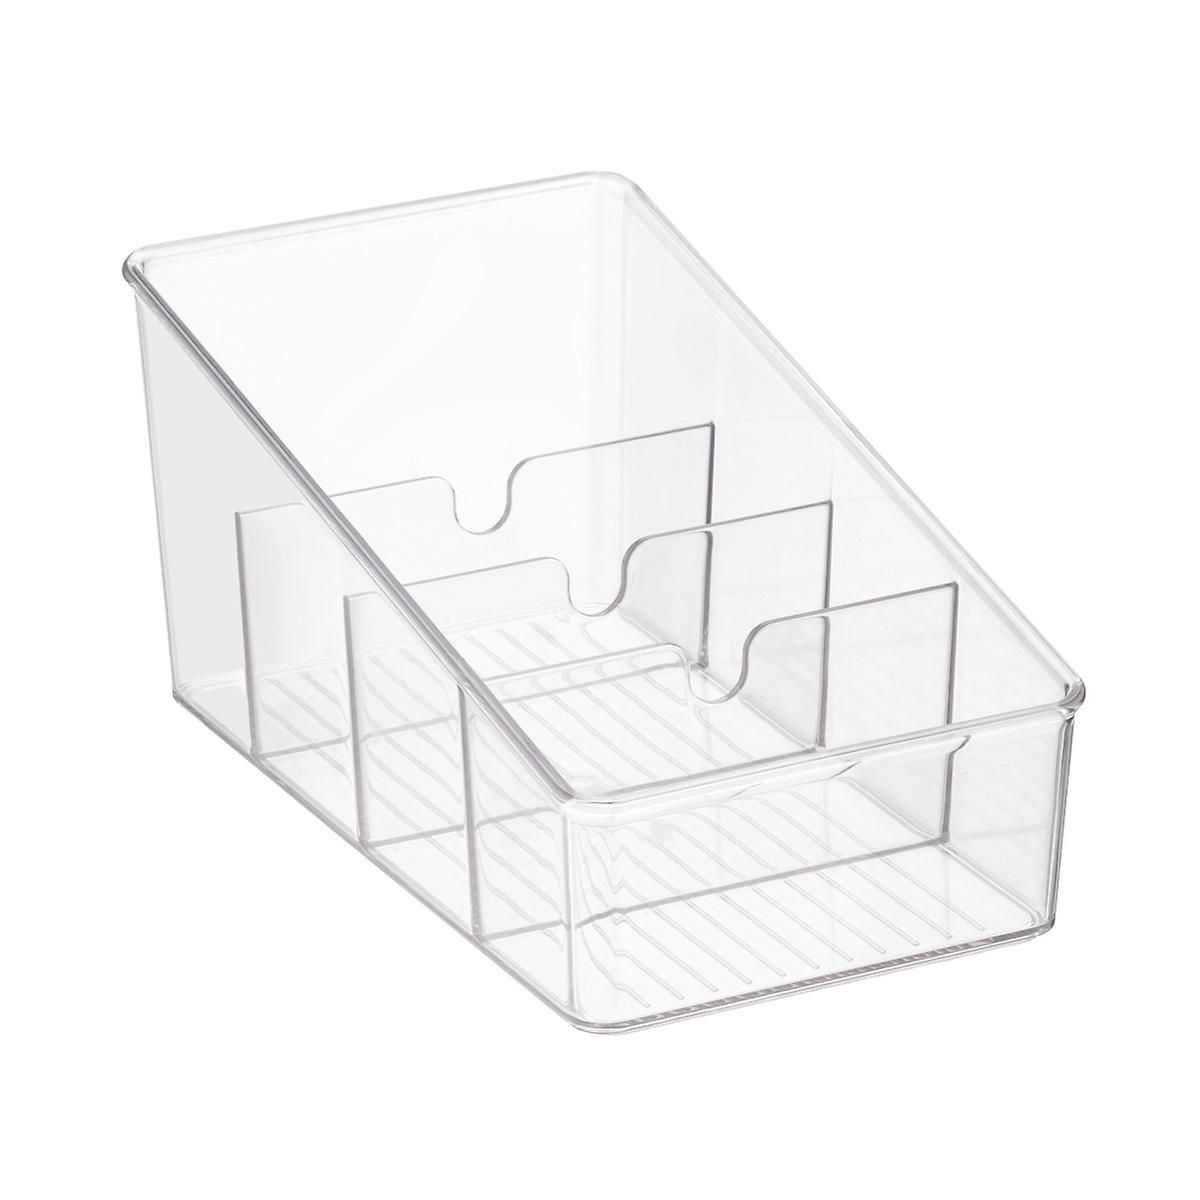 iDesign Linus Packet Organizer | The Container Store